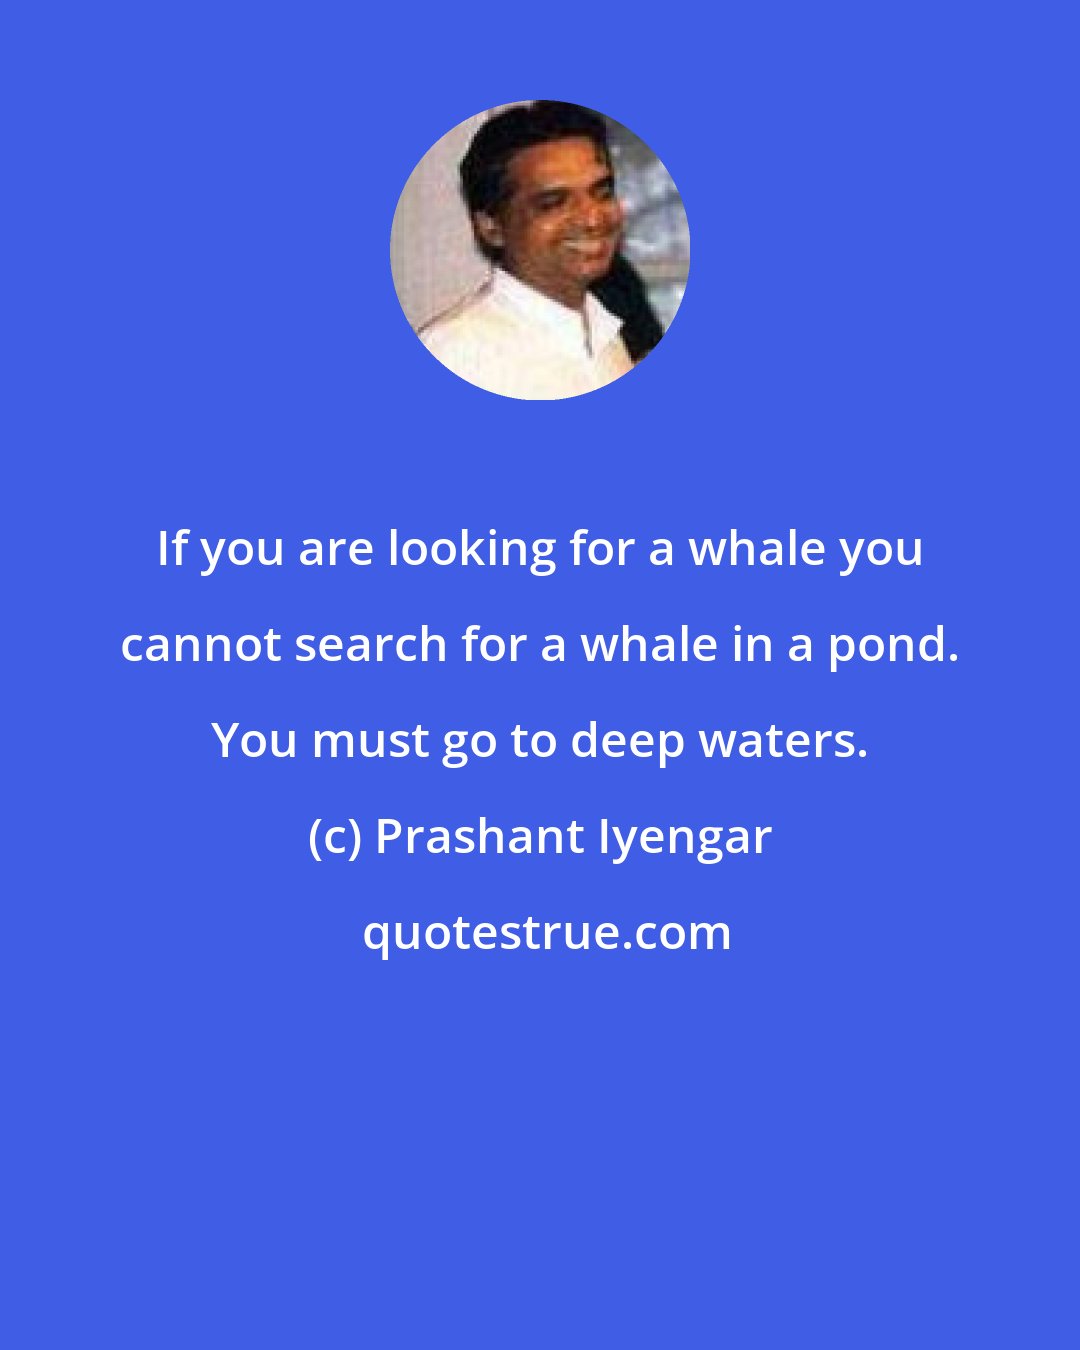 Prashant Iyengar: If you are looking for a whale you cannot search for a whale in a pond. You must go to deep waters.